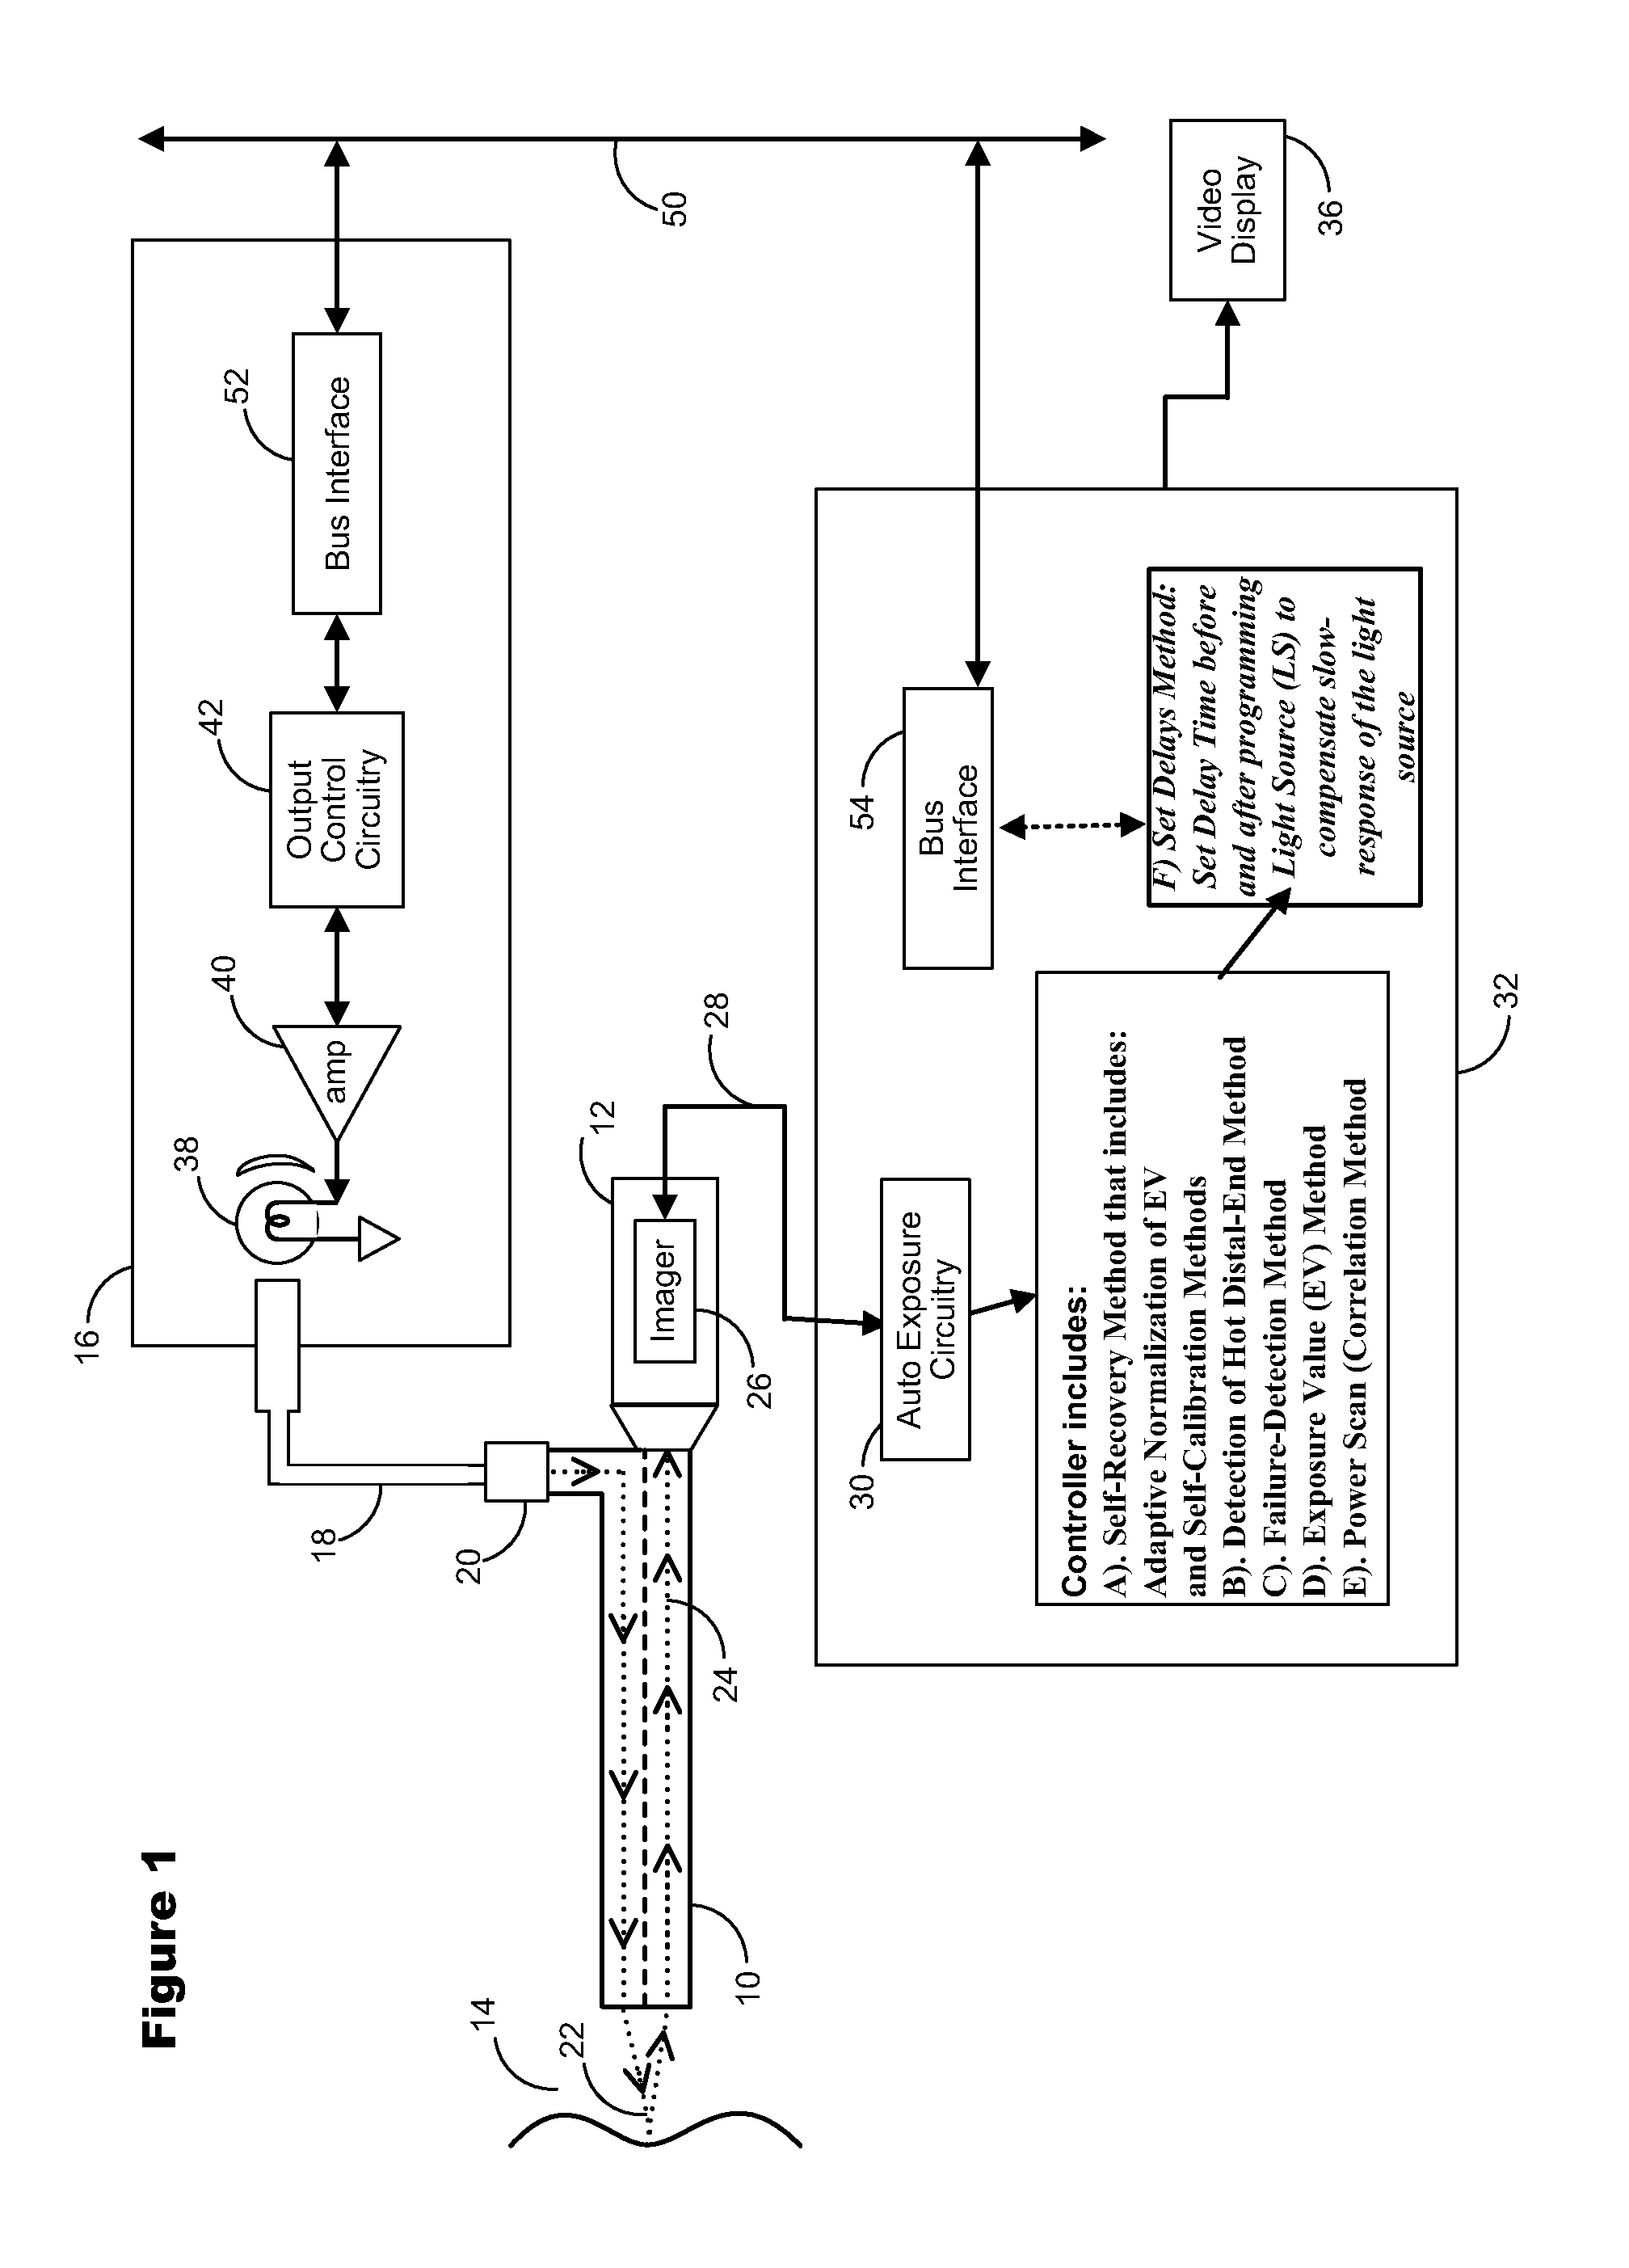 Method and Apparatus for Protection from High Intensity Light